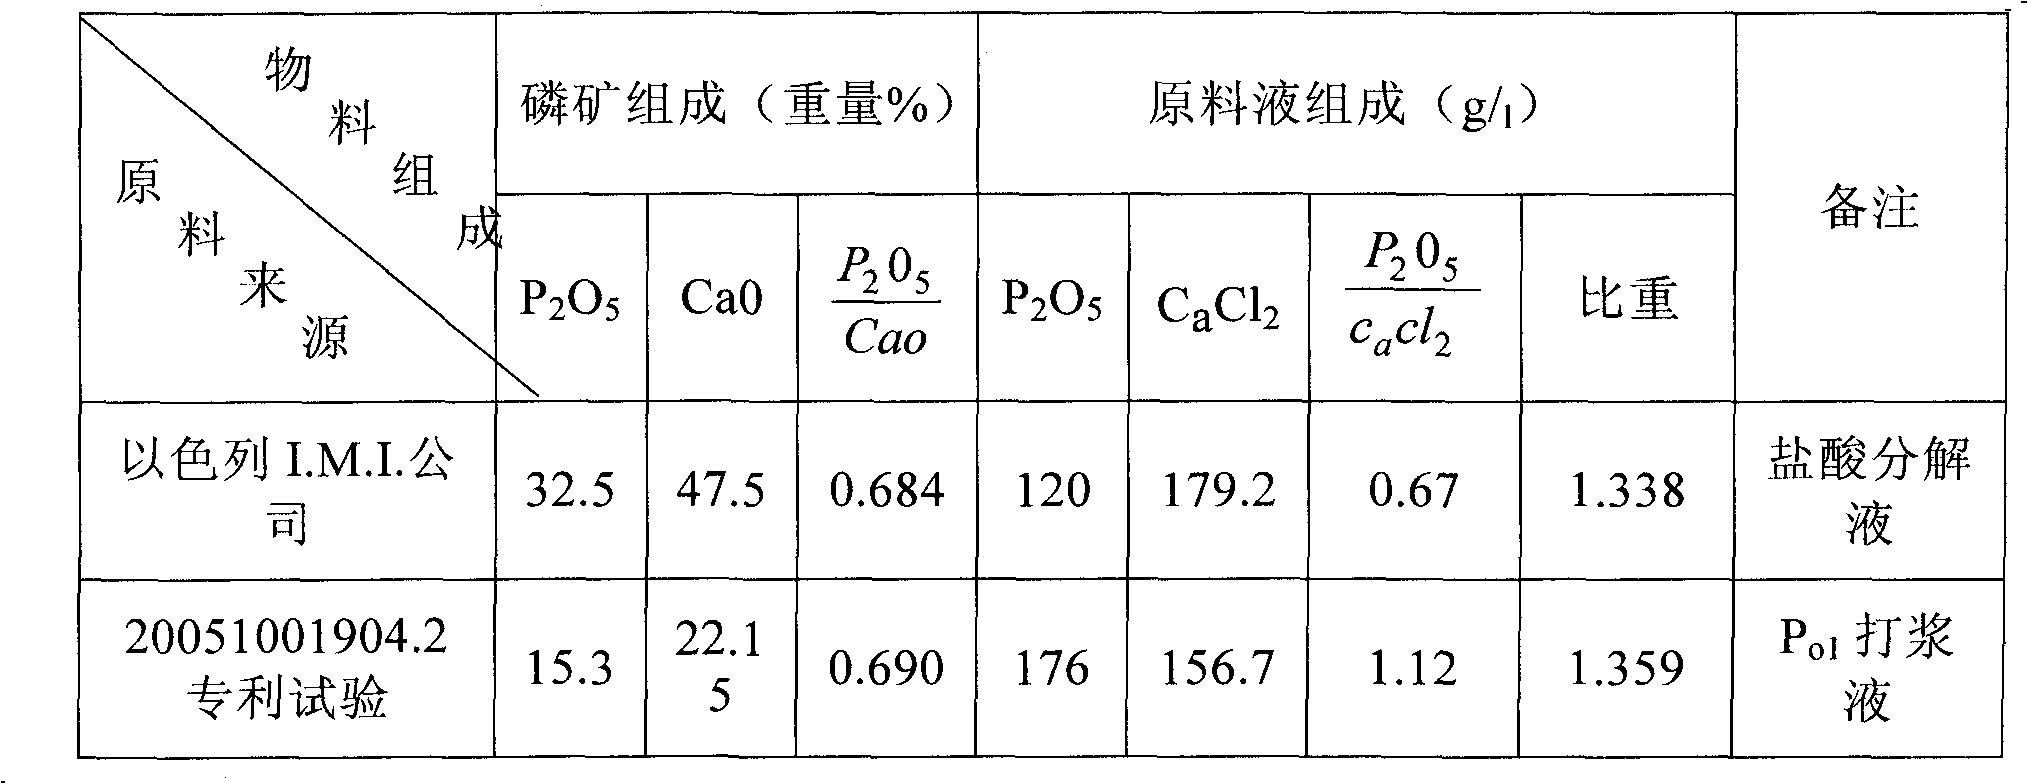 Method for manufacturing industrial phosphoric acid, industrial ammonium phosphate and food-grade phosphoric acid from medium and low-grade phosphorite by one-step extraction of hydrochloric acid method